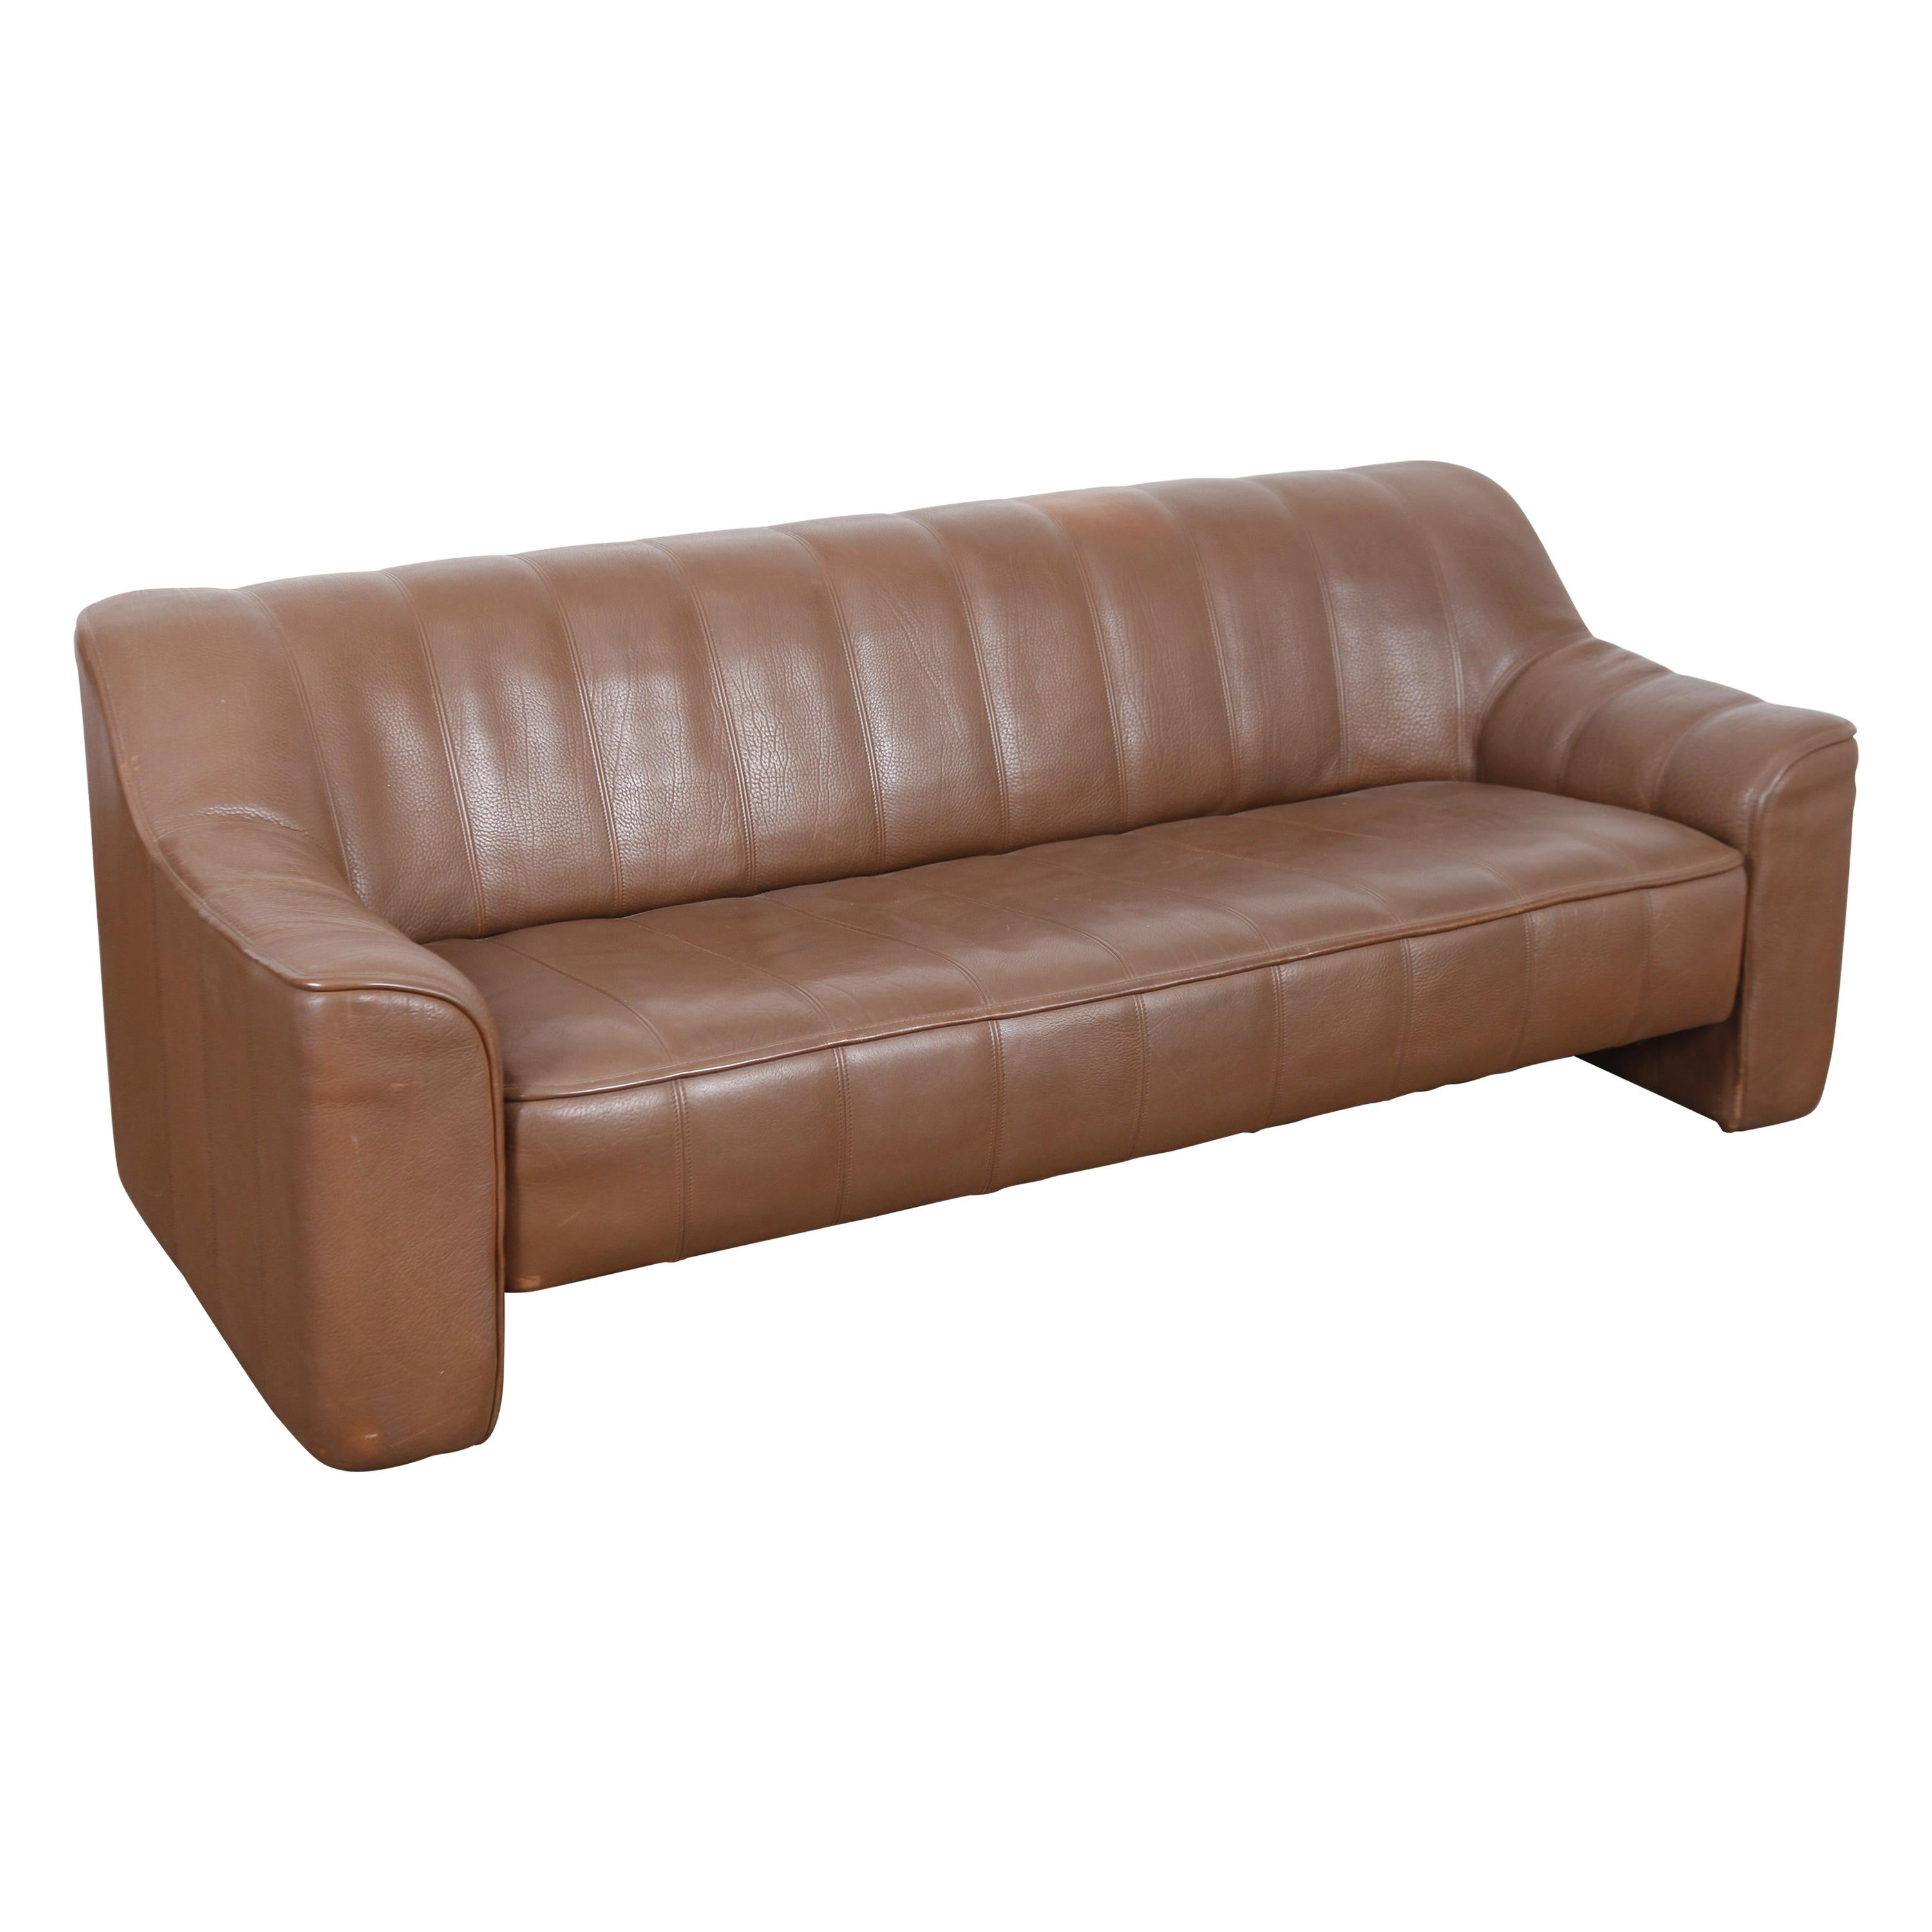 1970s De Sede Leather 3-Seat Sofa 'Model DS 44' from Switzerland For Sale